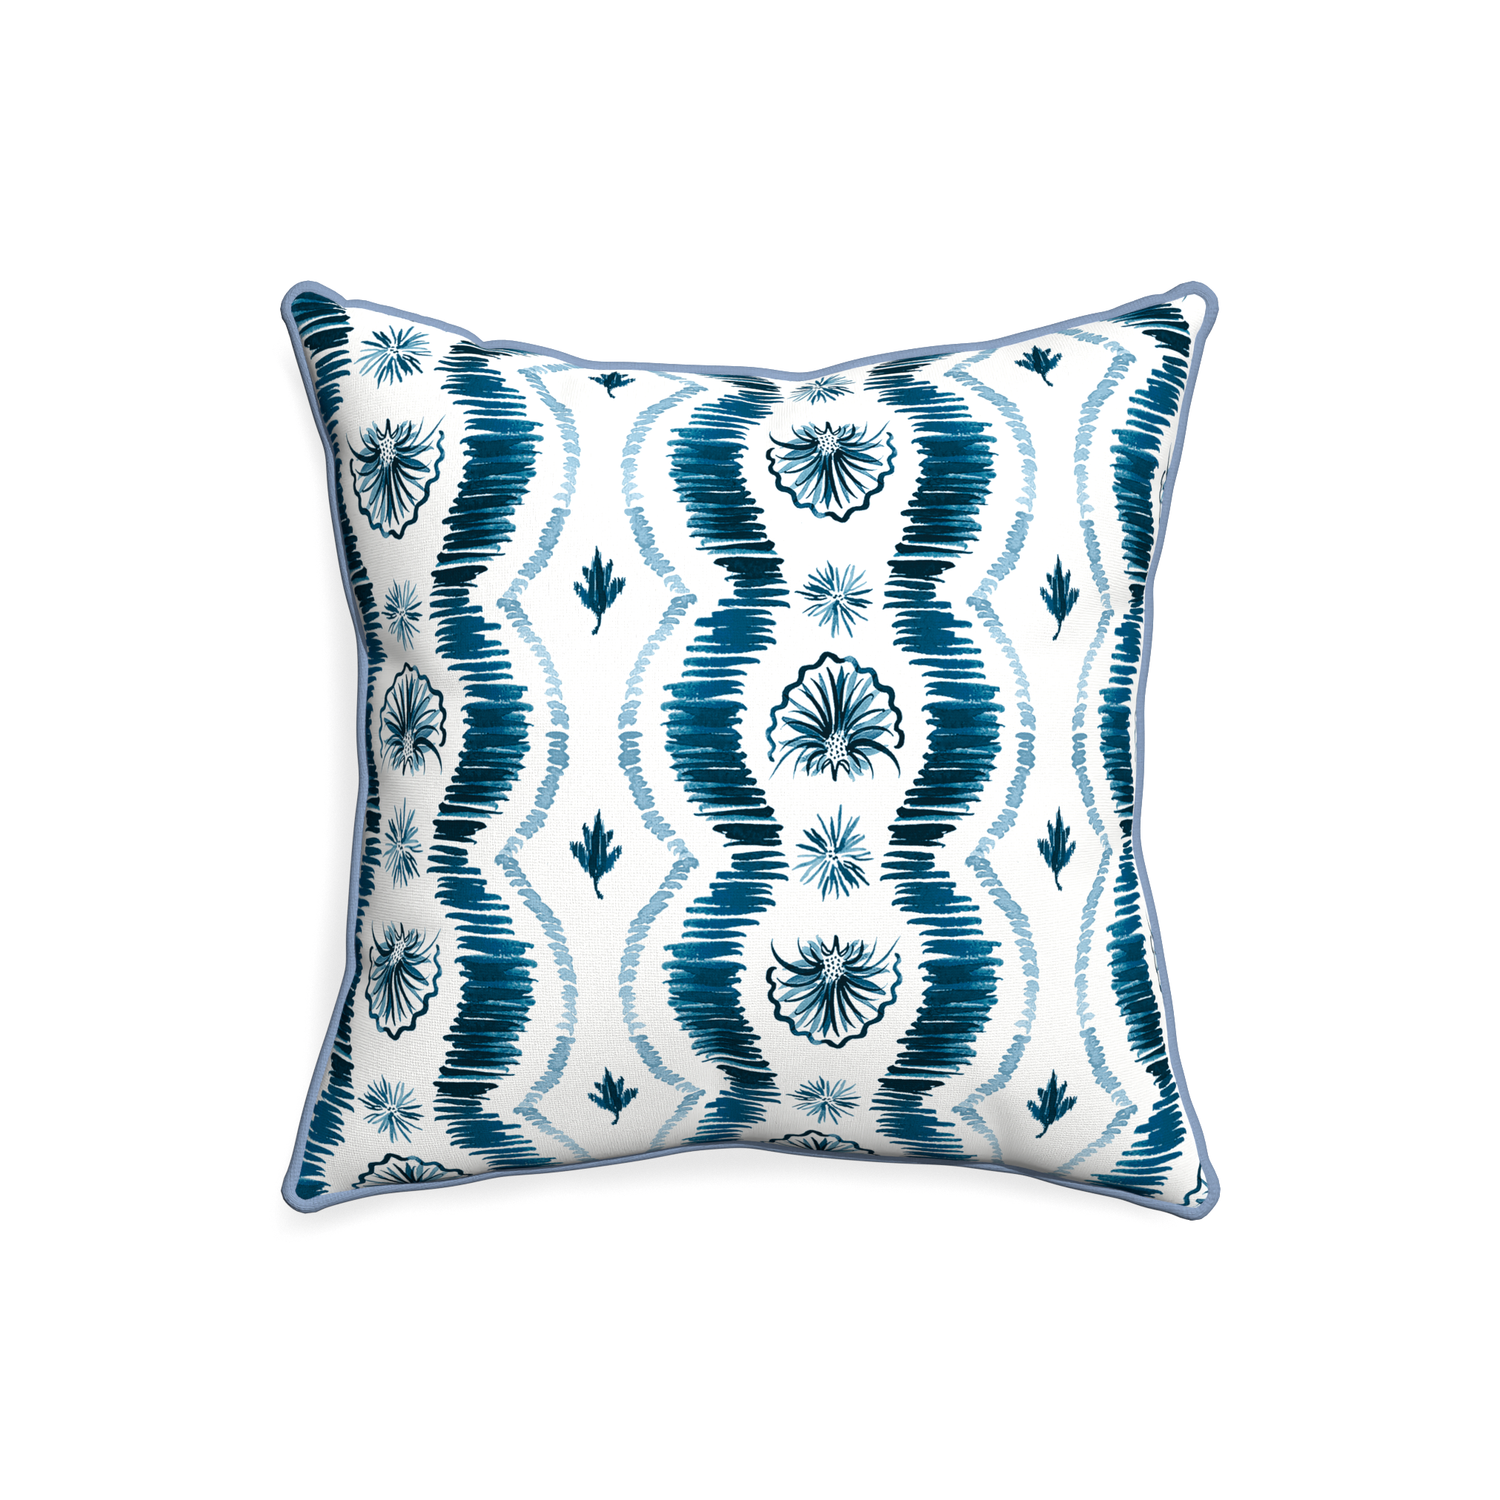 20-square alice custom blue ikatpillow with sky piping on white background